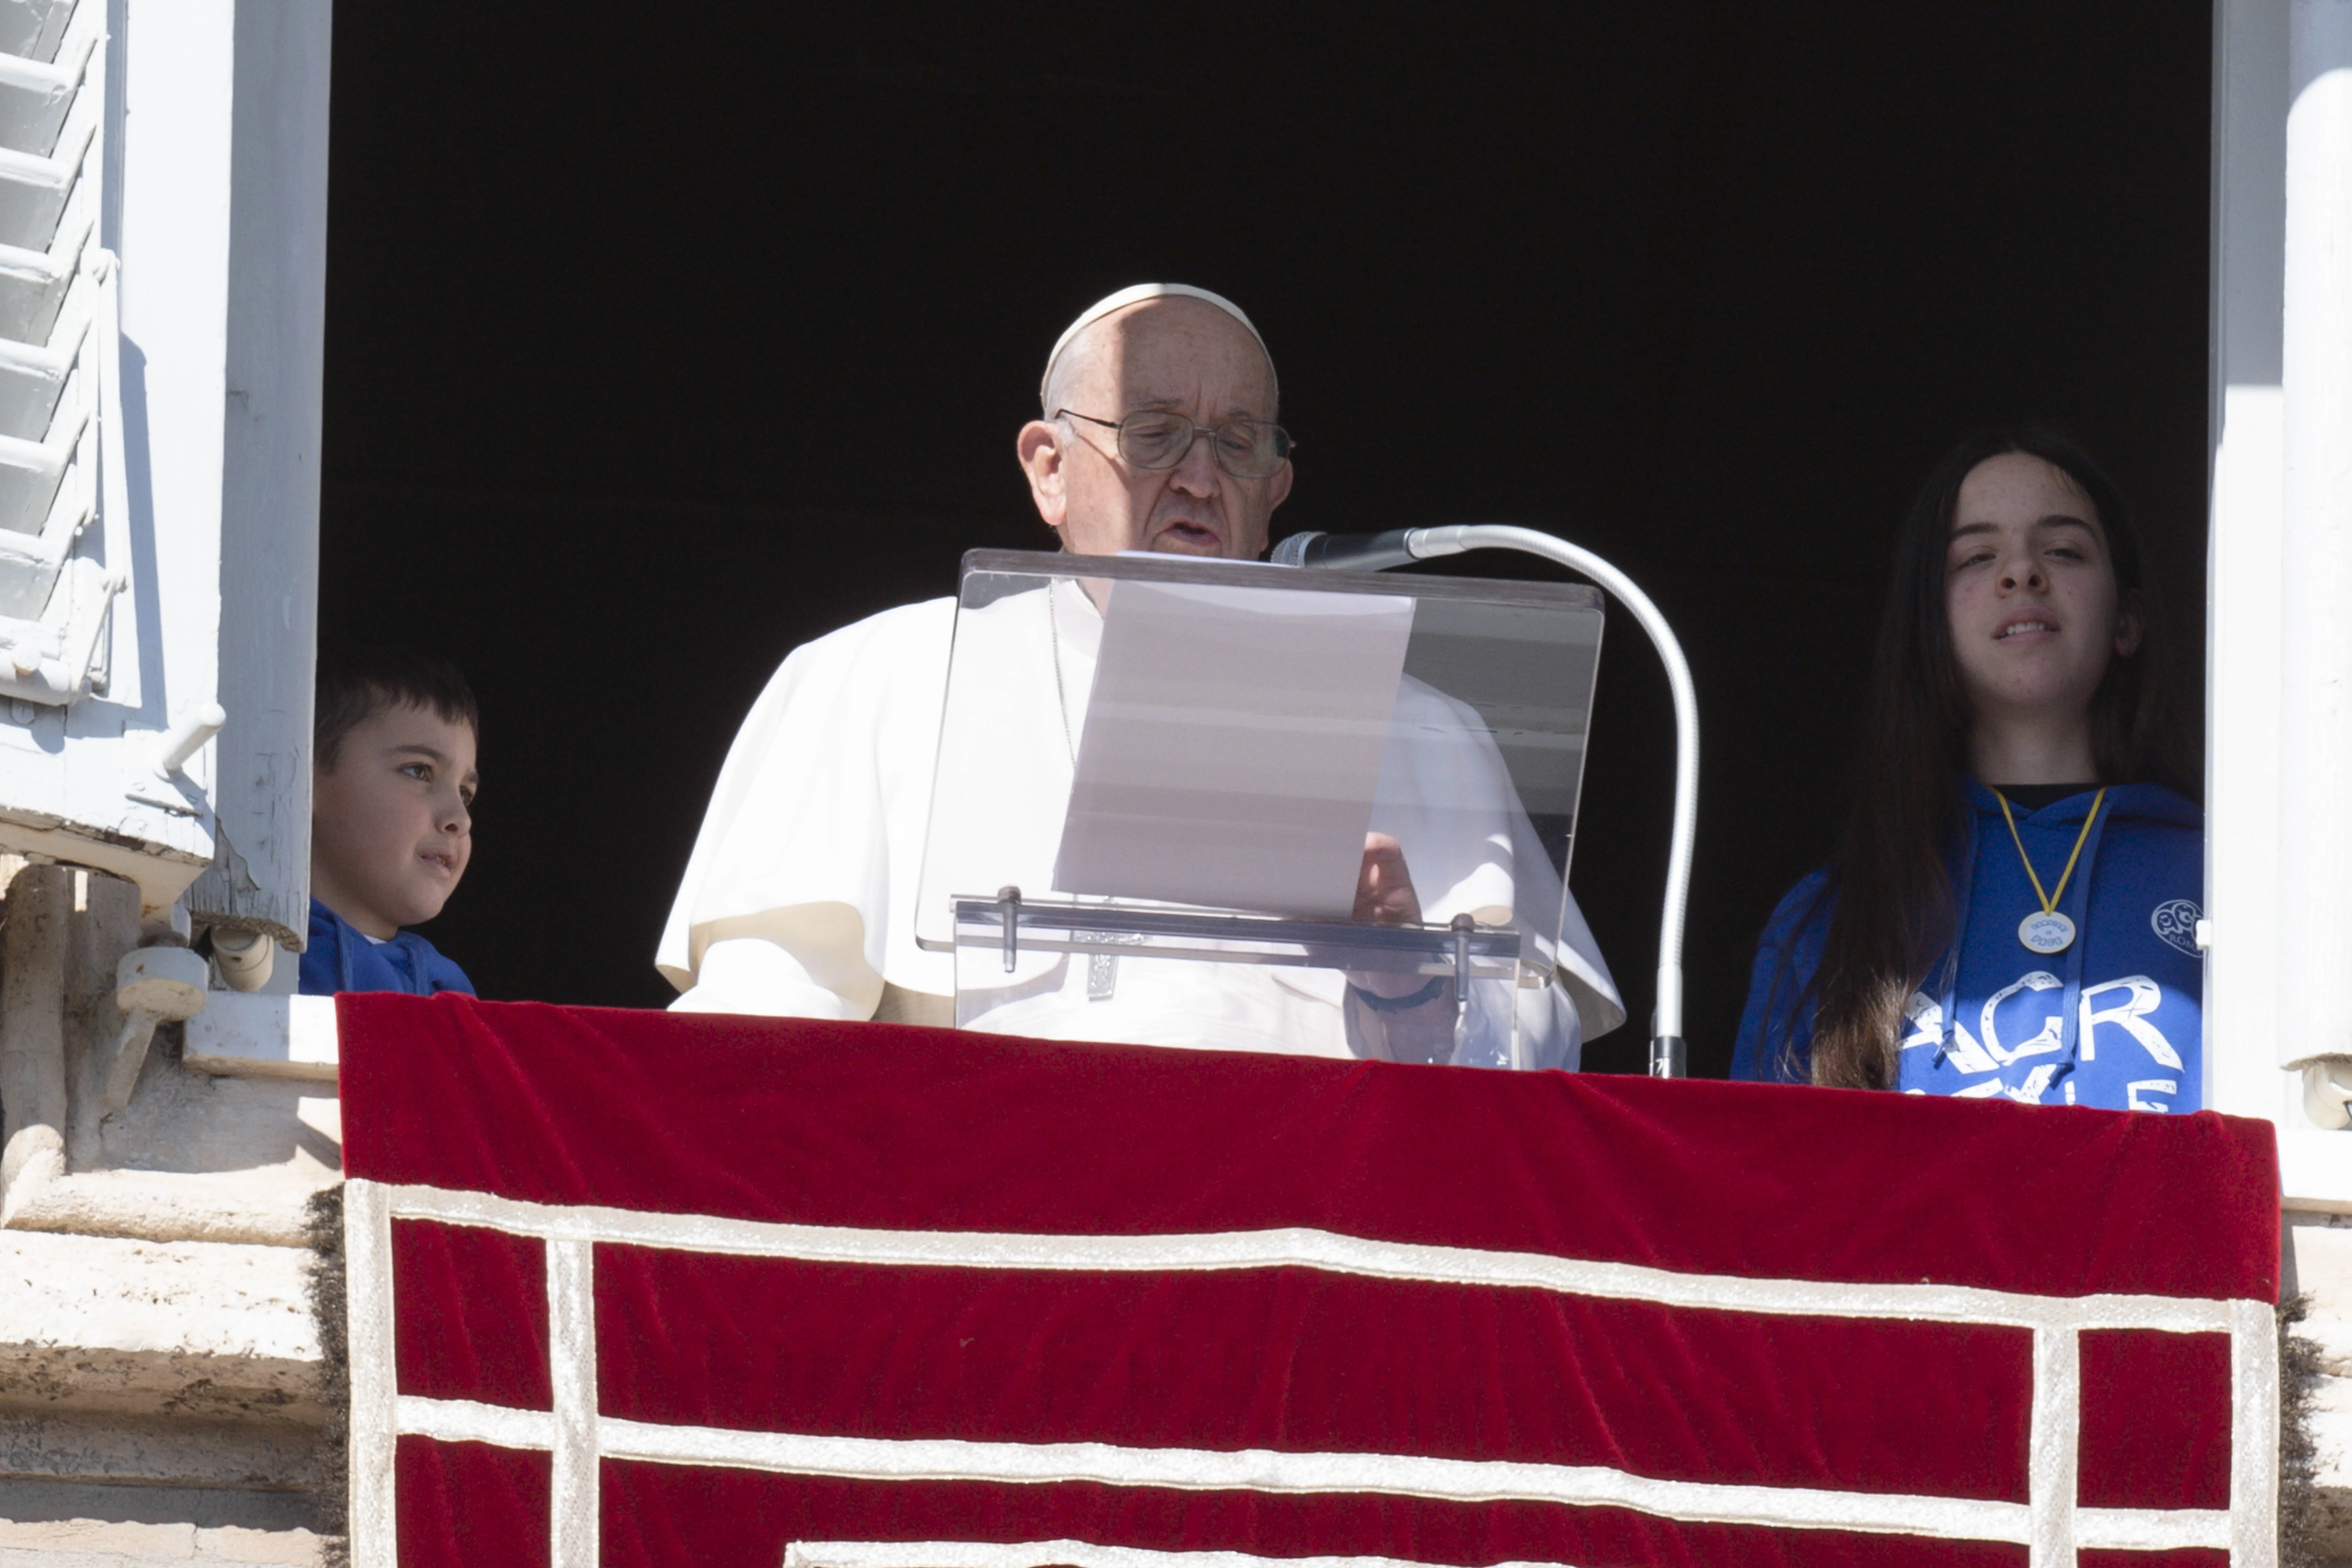 A young boy and girl in blue sweatshirts joined Pope Francis in the window of the Apostolic Palace and read aloud a letter sharing their efforts as part of Catholic Action’s “Caravan of Peace.” Vatican Media